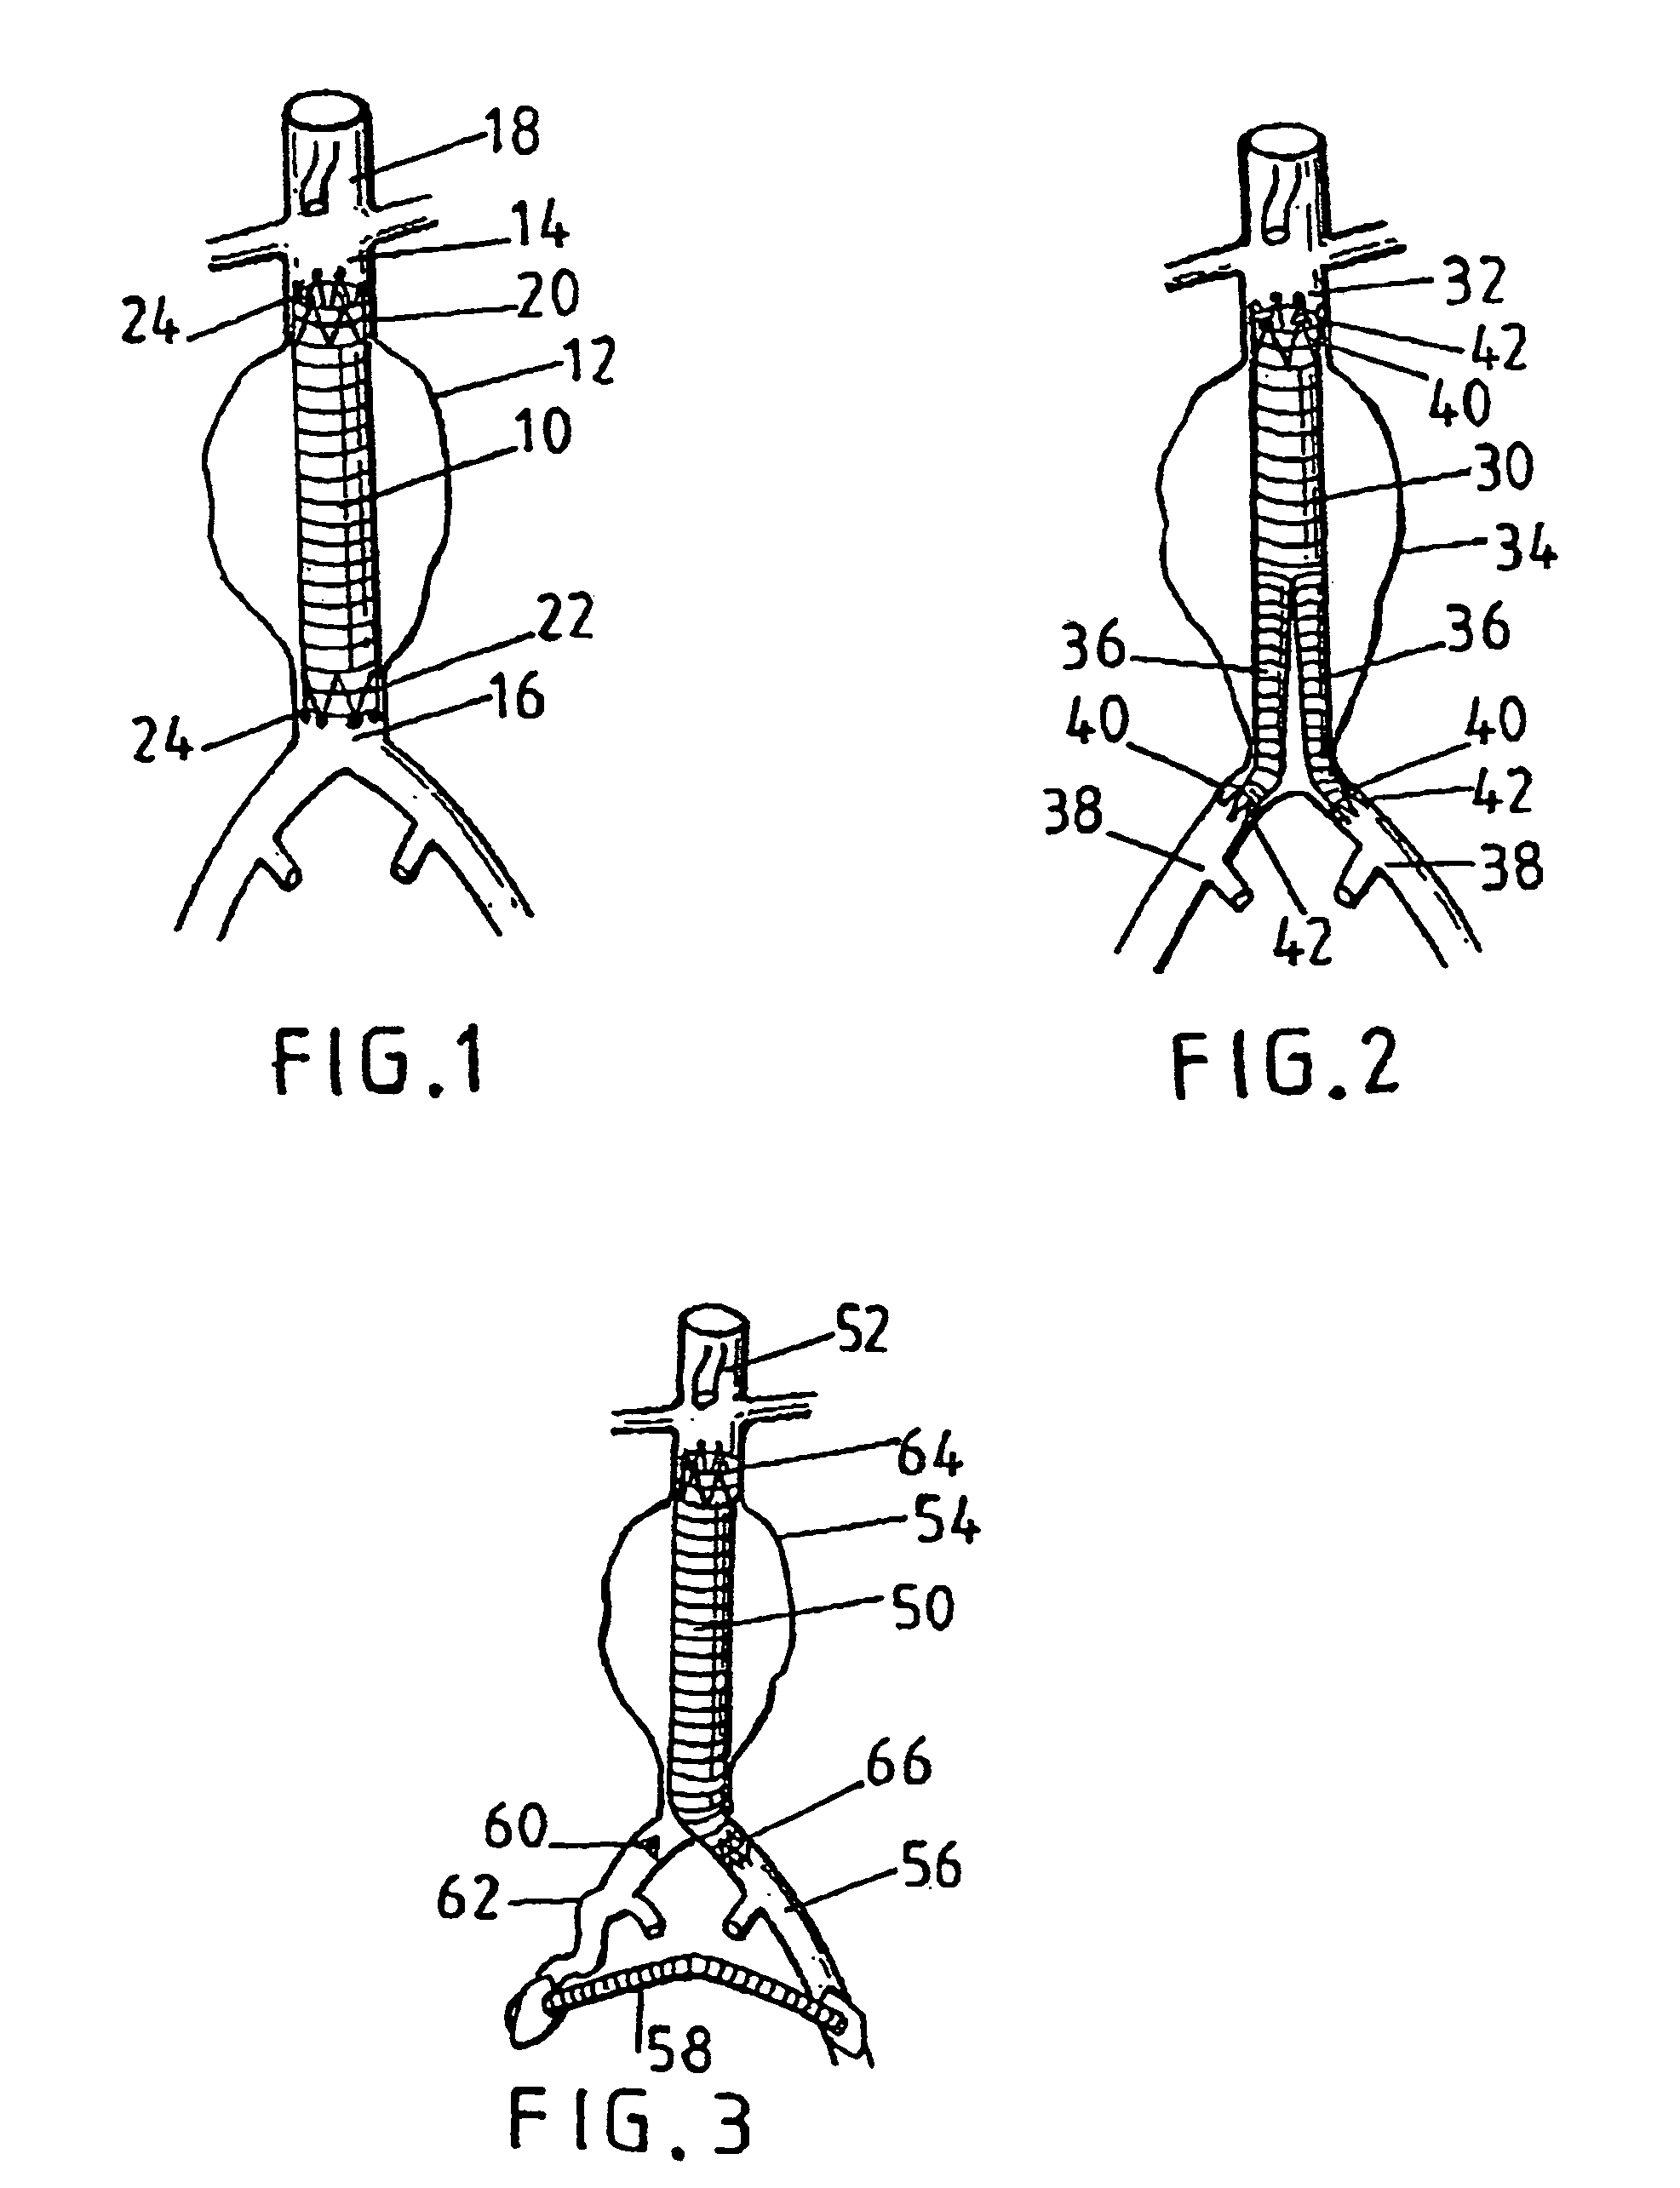 Devices for repairing aneurysms